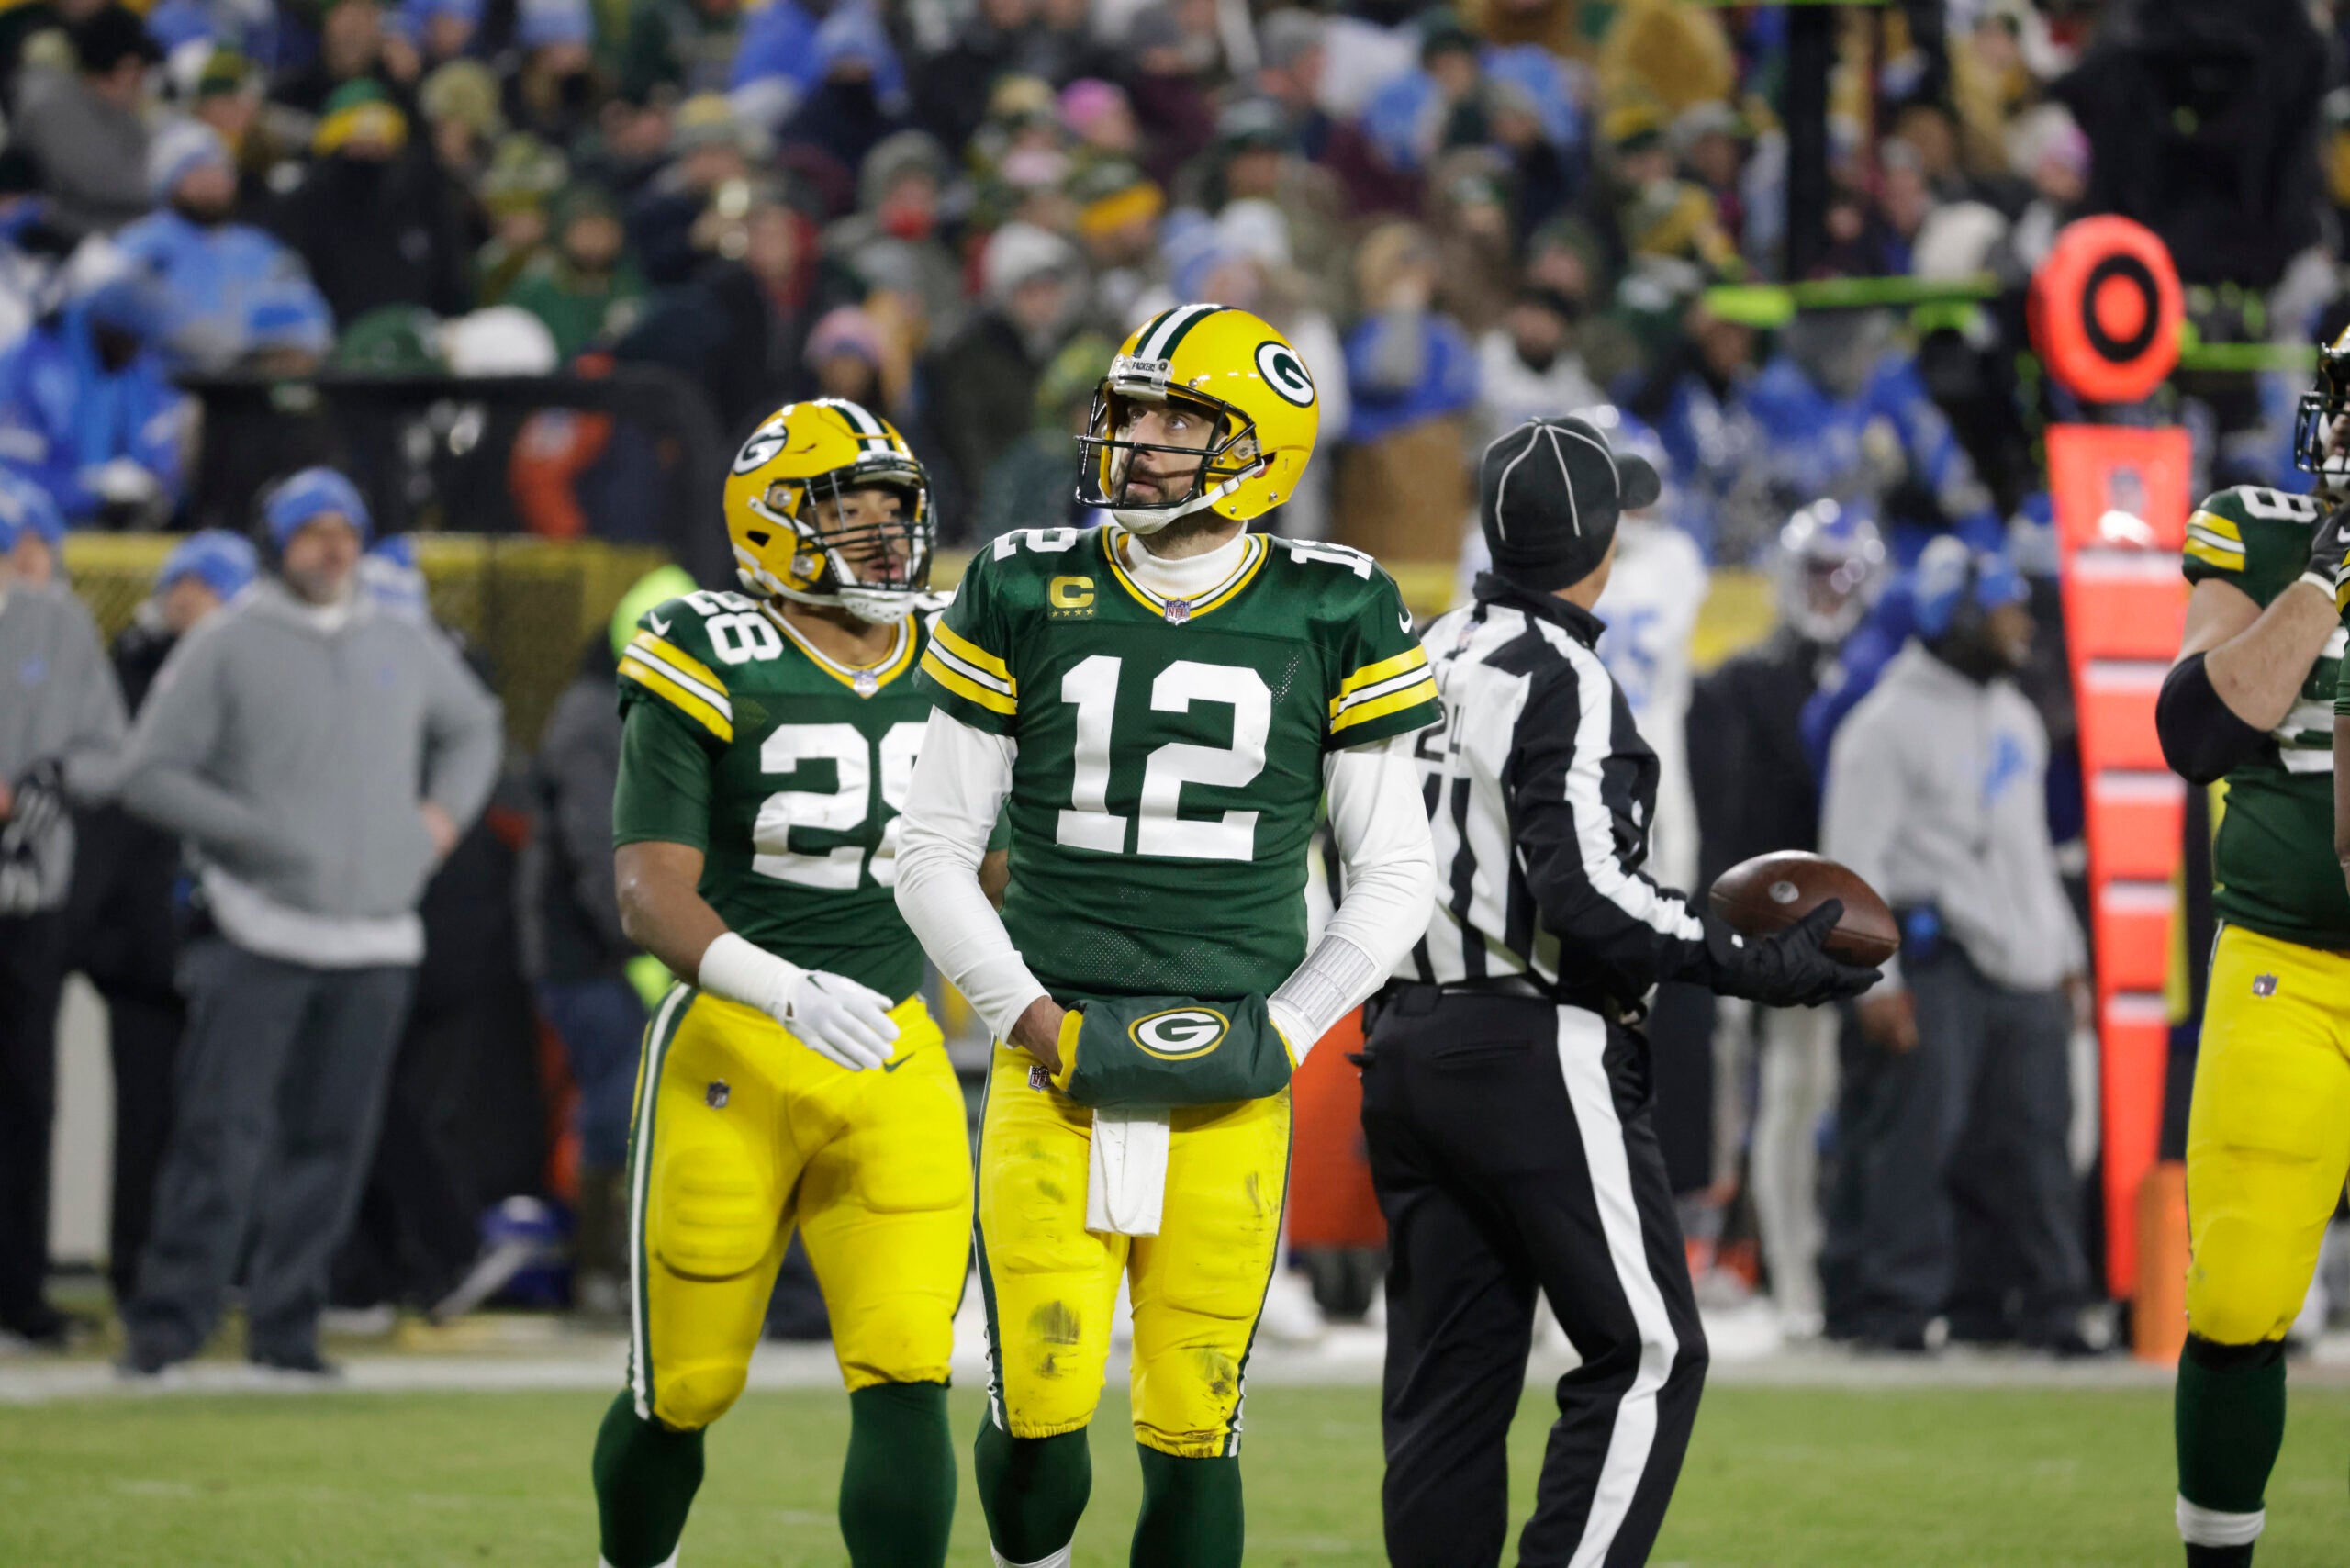 Packers quarterback Aaron Rodgers in a game against the Lions.